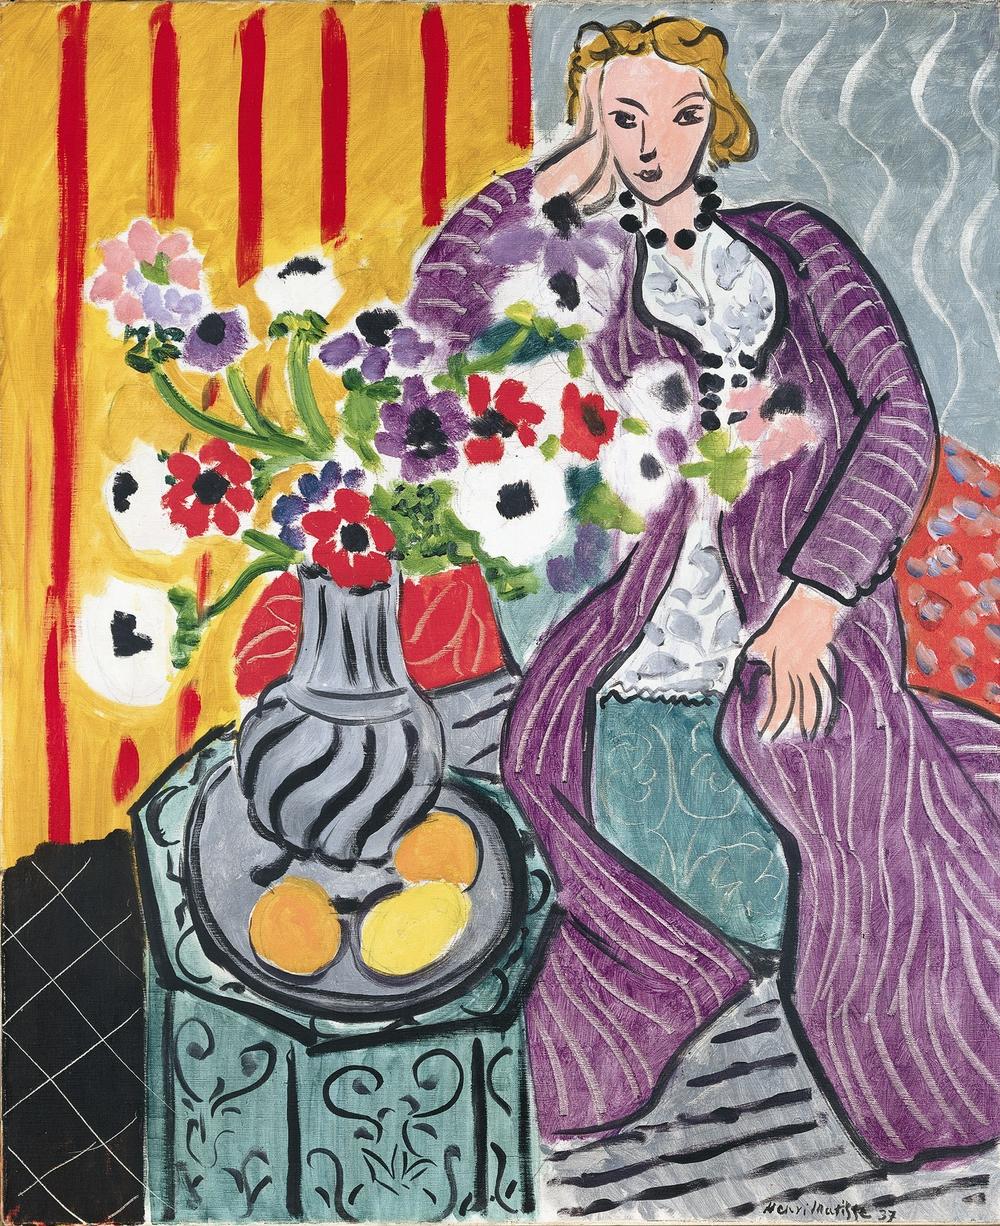 Henri Matisse, <em>Purple Robe and Anemones,</em> 1937, The Baltimore Museum of Art: The Cone Collection, formed by Dr. Claribel Cone and Miss Etta Cone of Baltimore, Maryland, BMA 1950.261